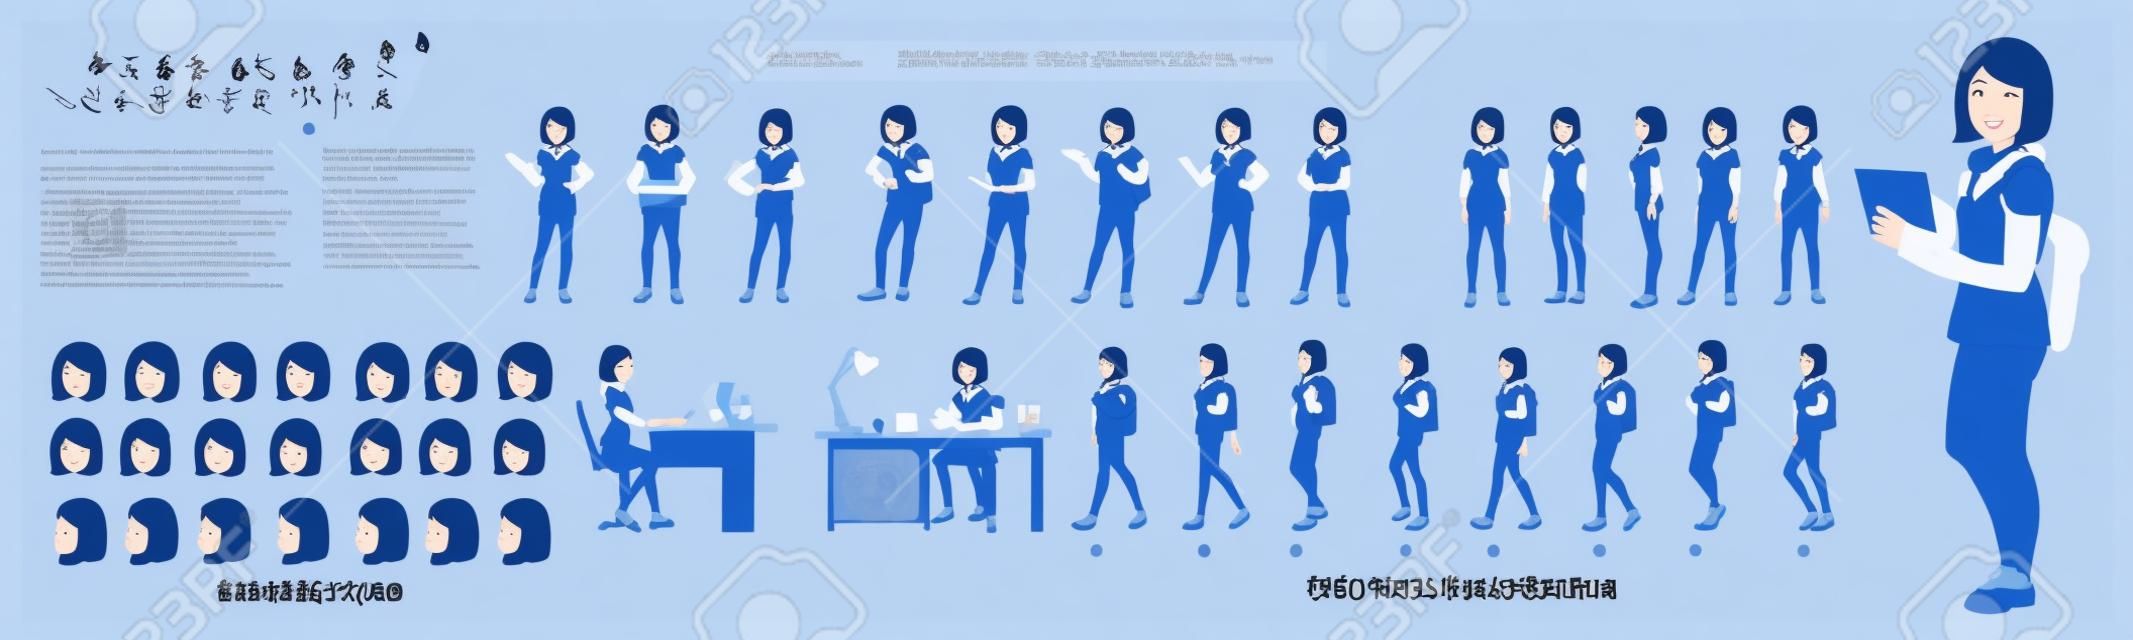 Asian Girl Student Character Design Model Sheet with walk cycle animation. Girl Character design.